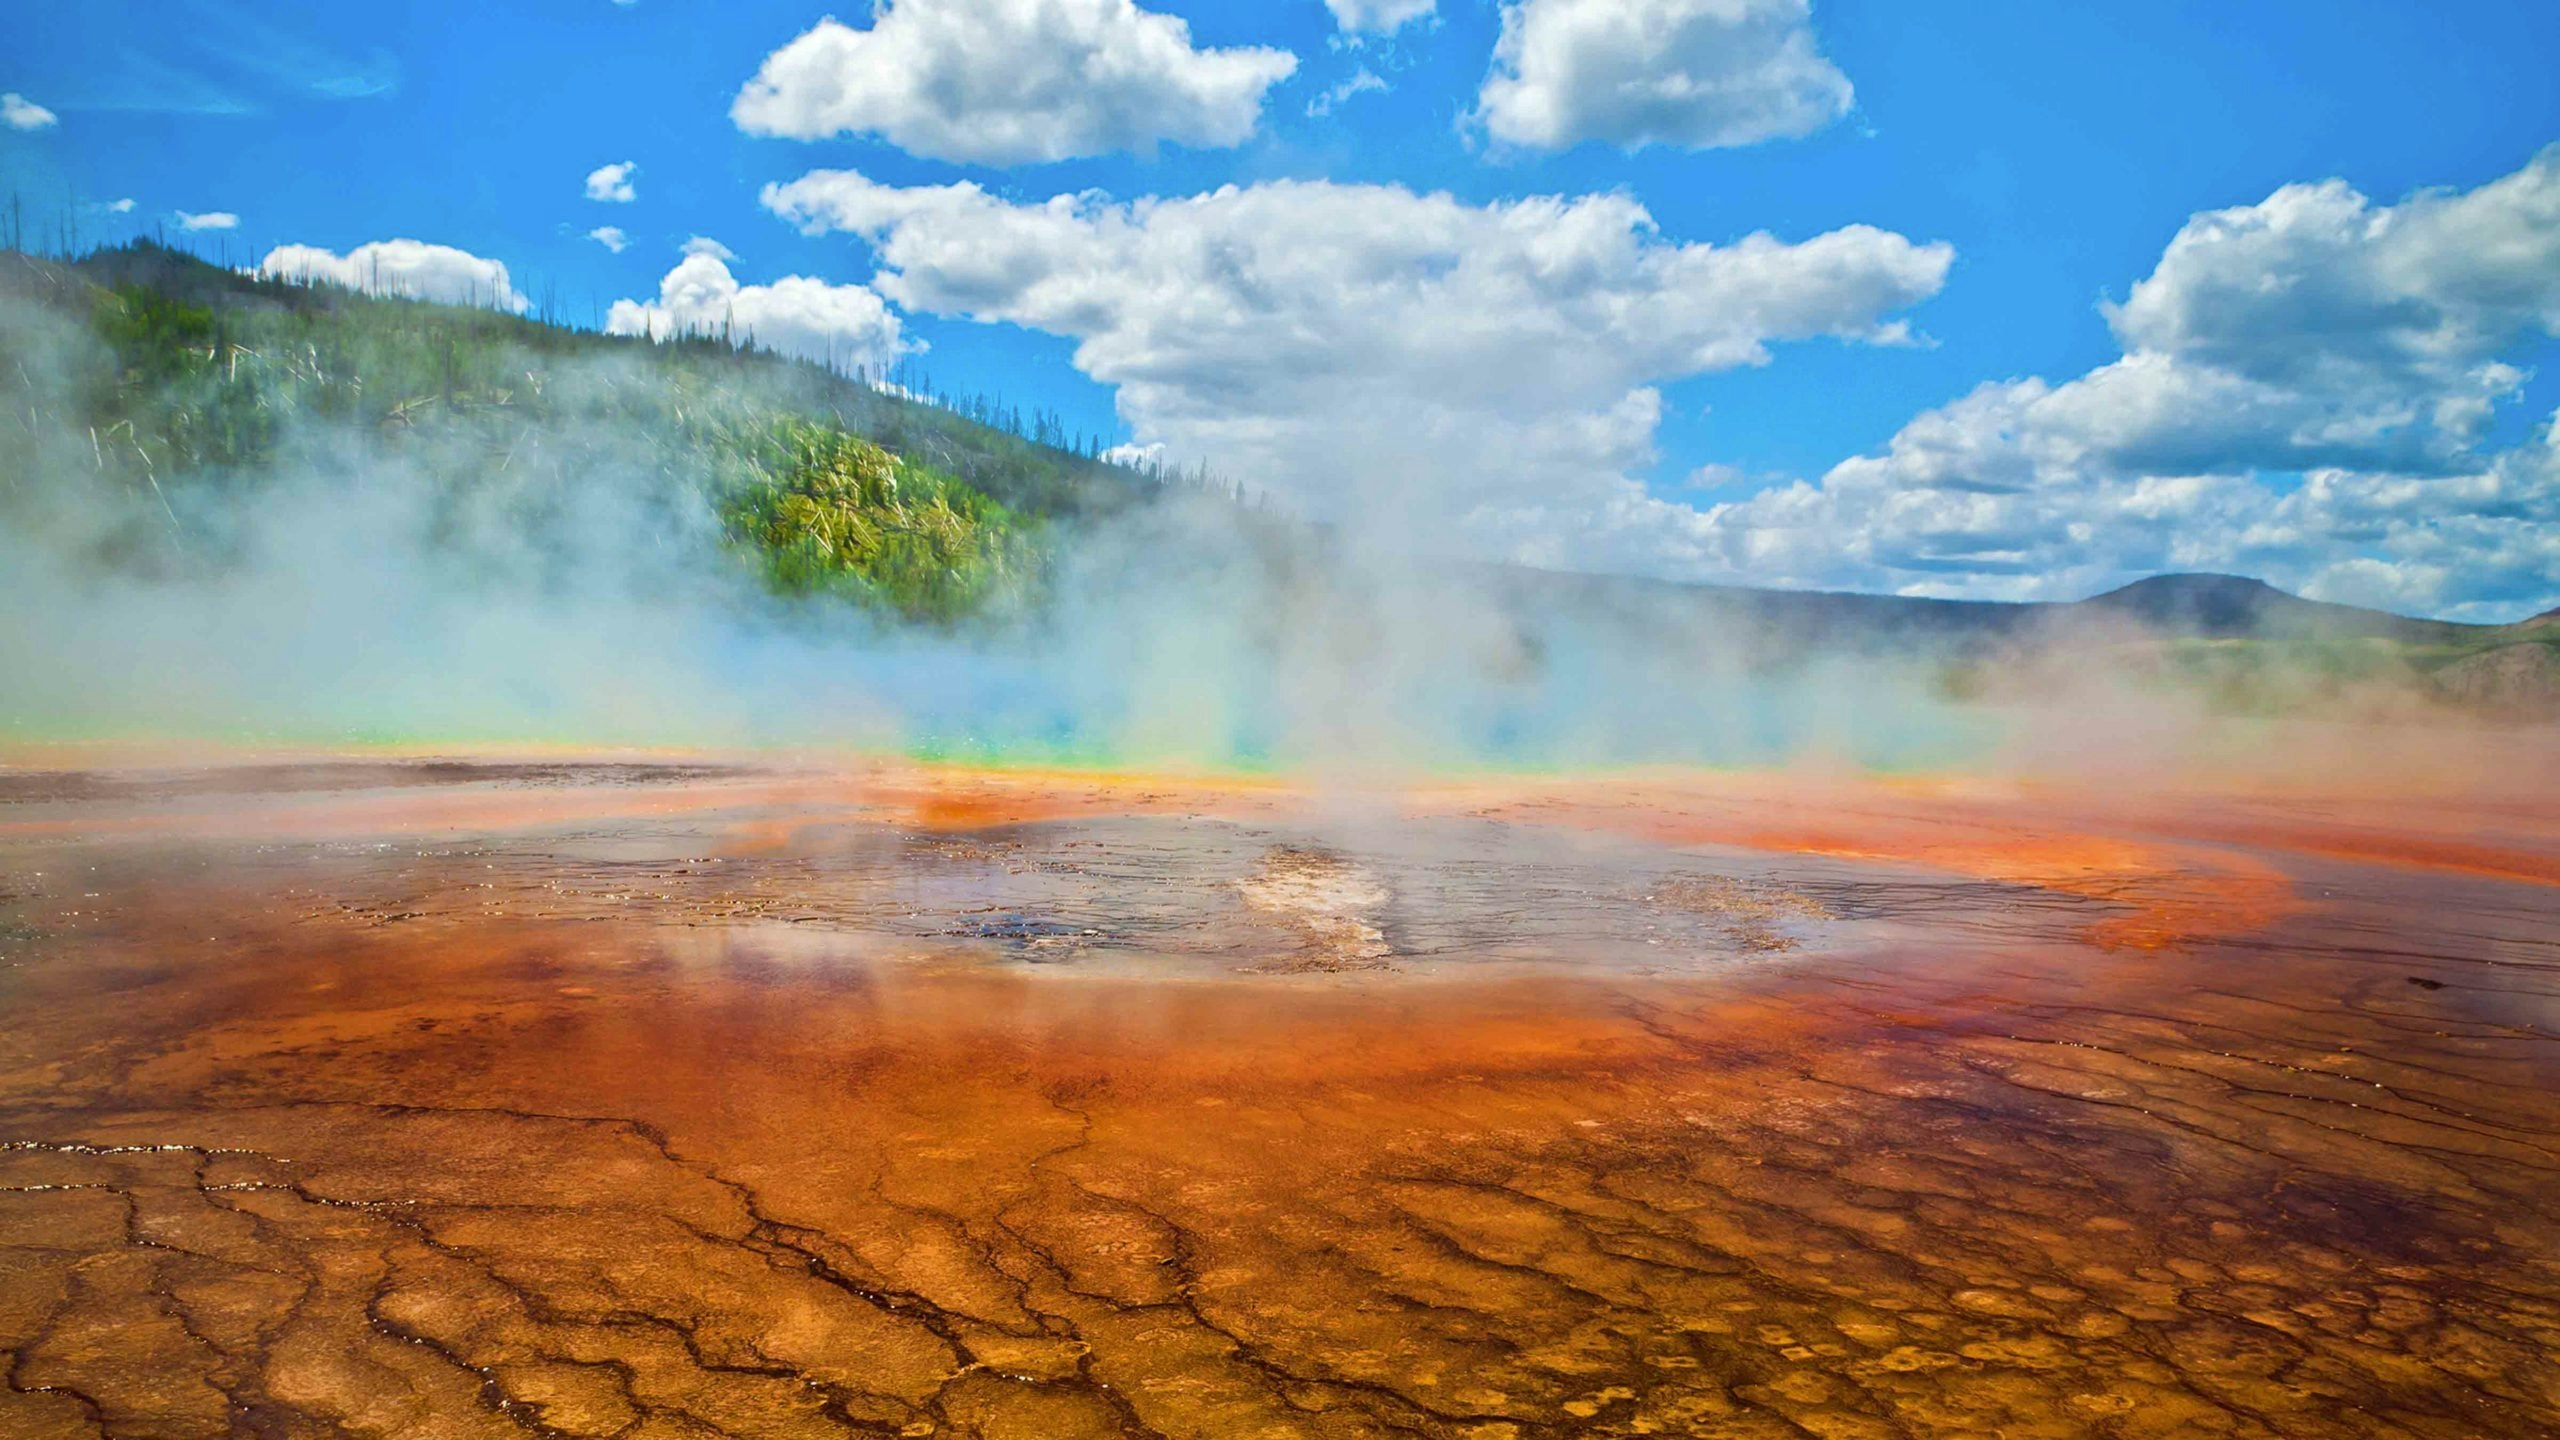 While the Wyoming craton is the most stable place under North America, the region also is home to Yellowstone National Park, which is one of the planets hot spots and is creating some of its younger rocks.